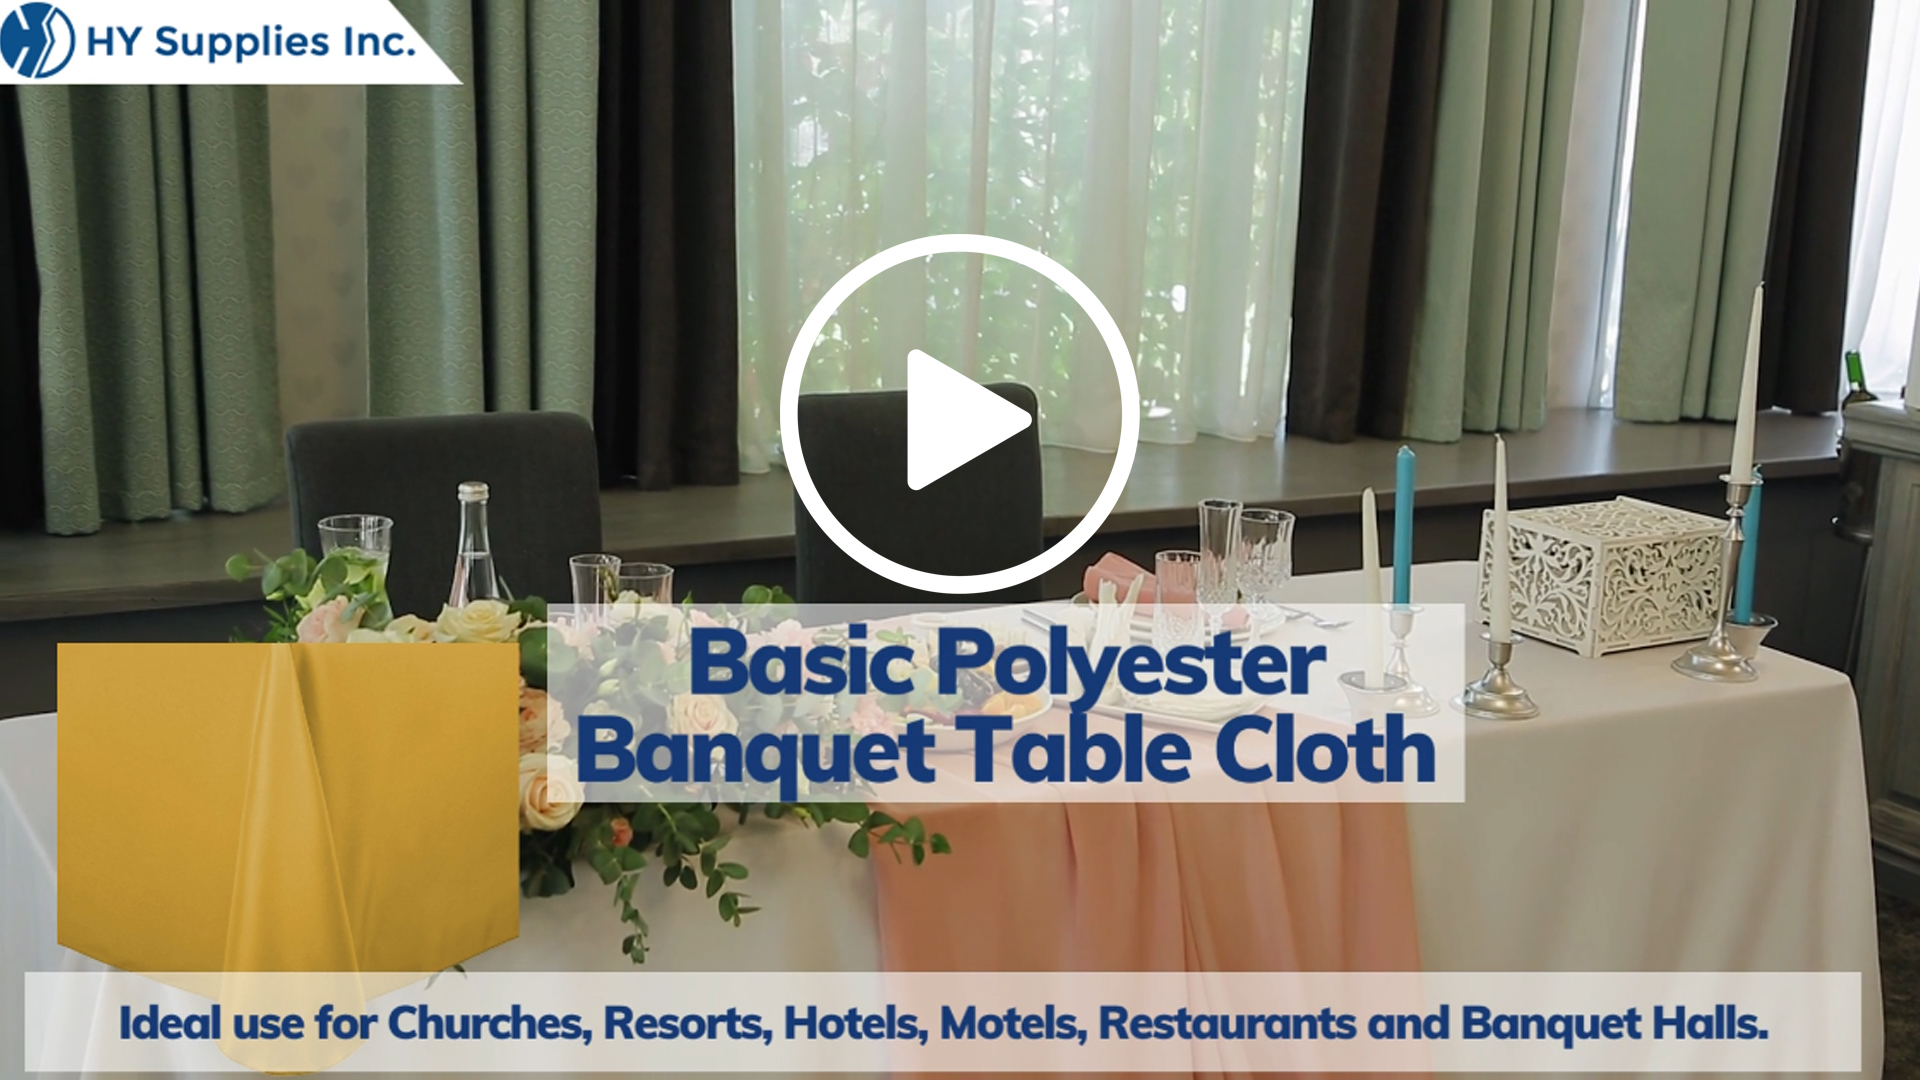 Basic Polyester Banquet Table Cloth